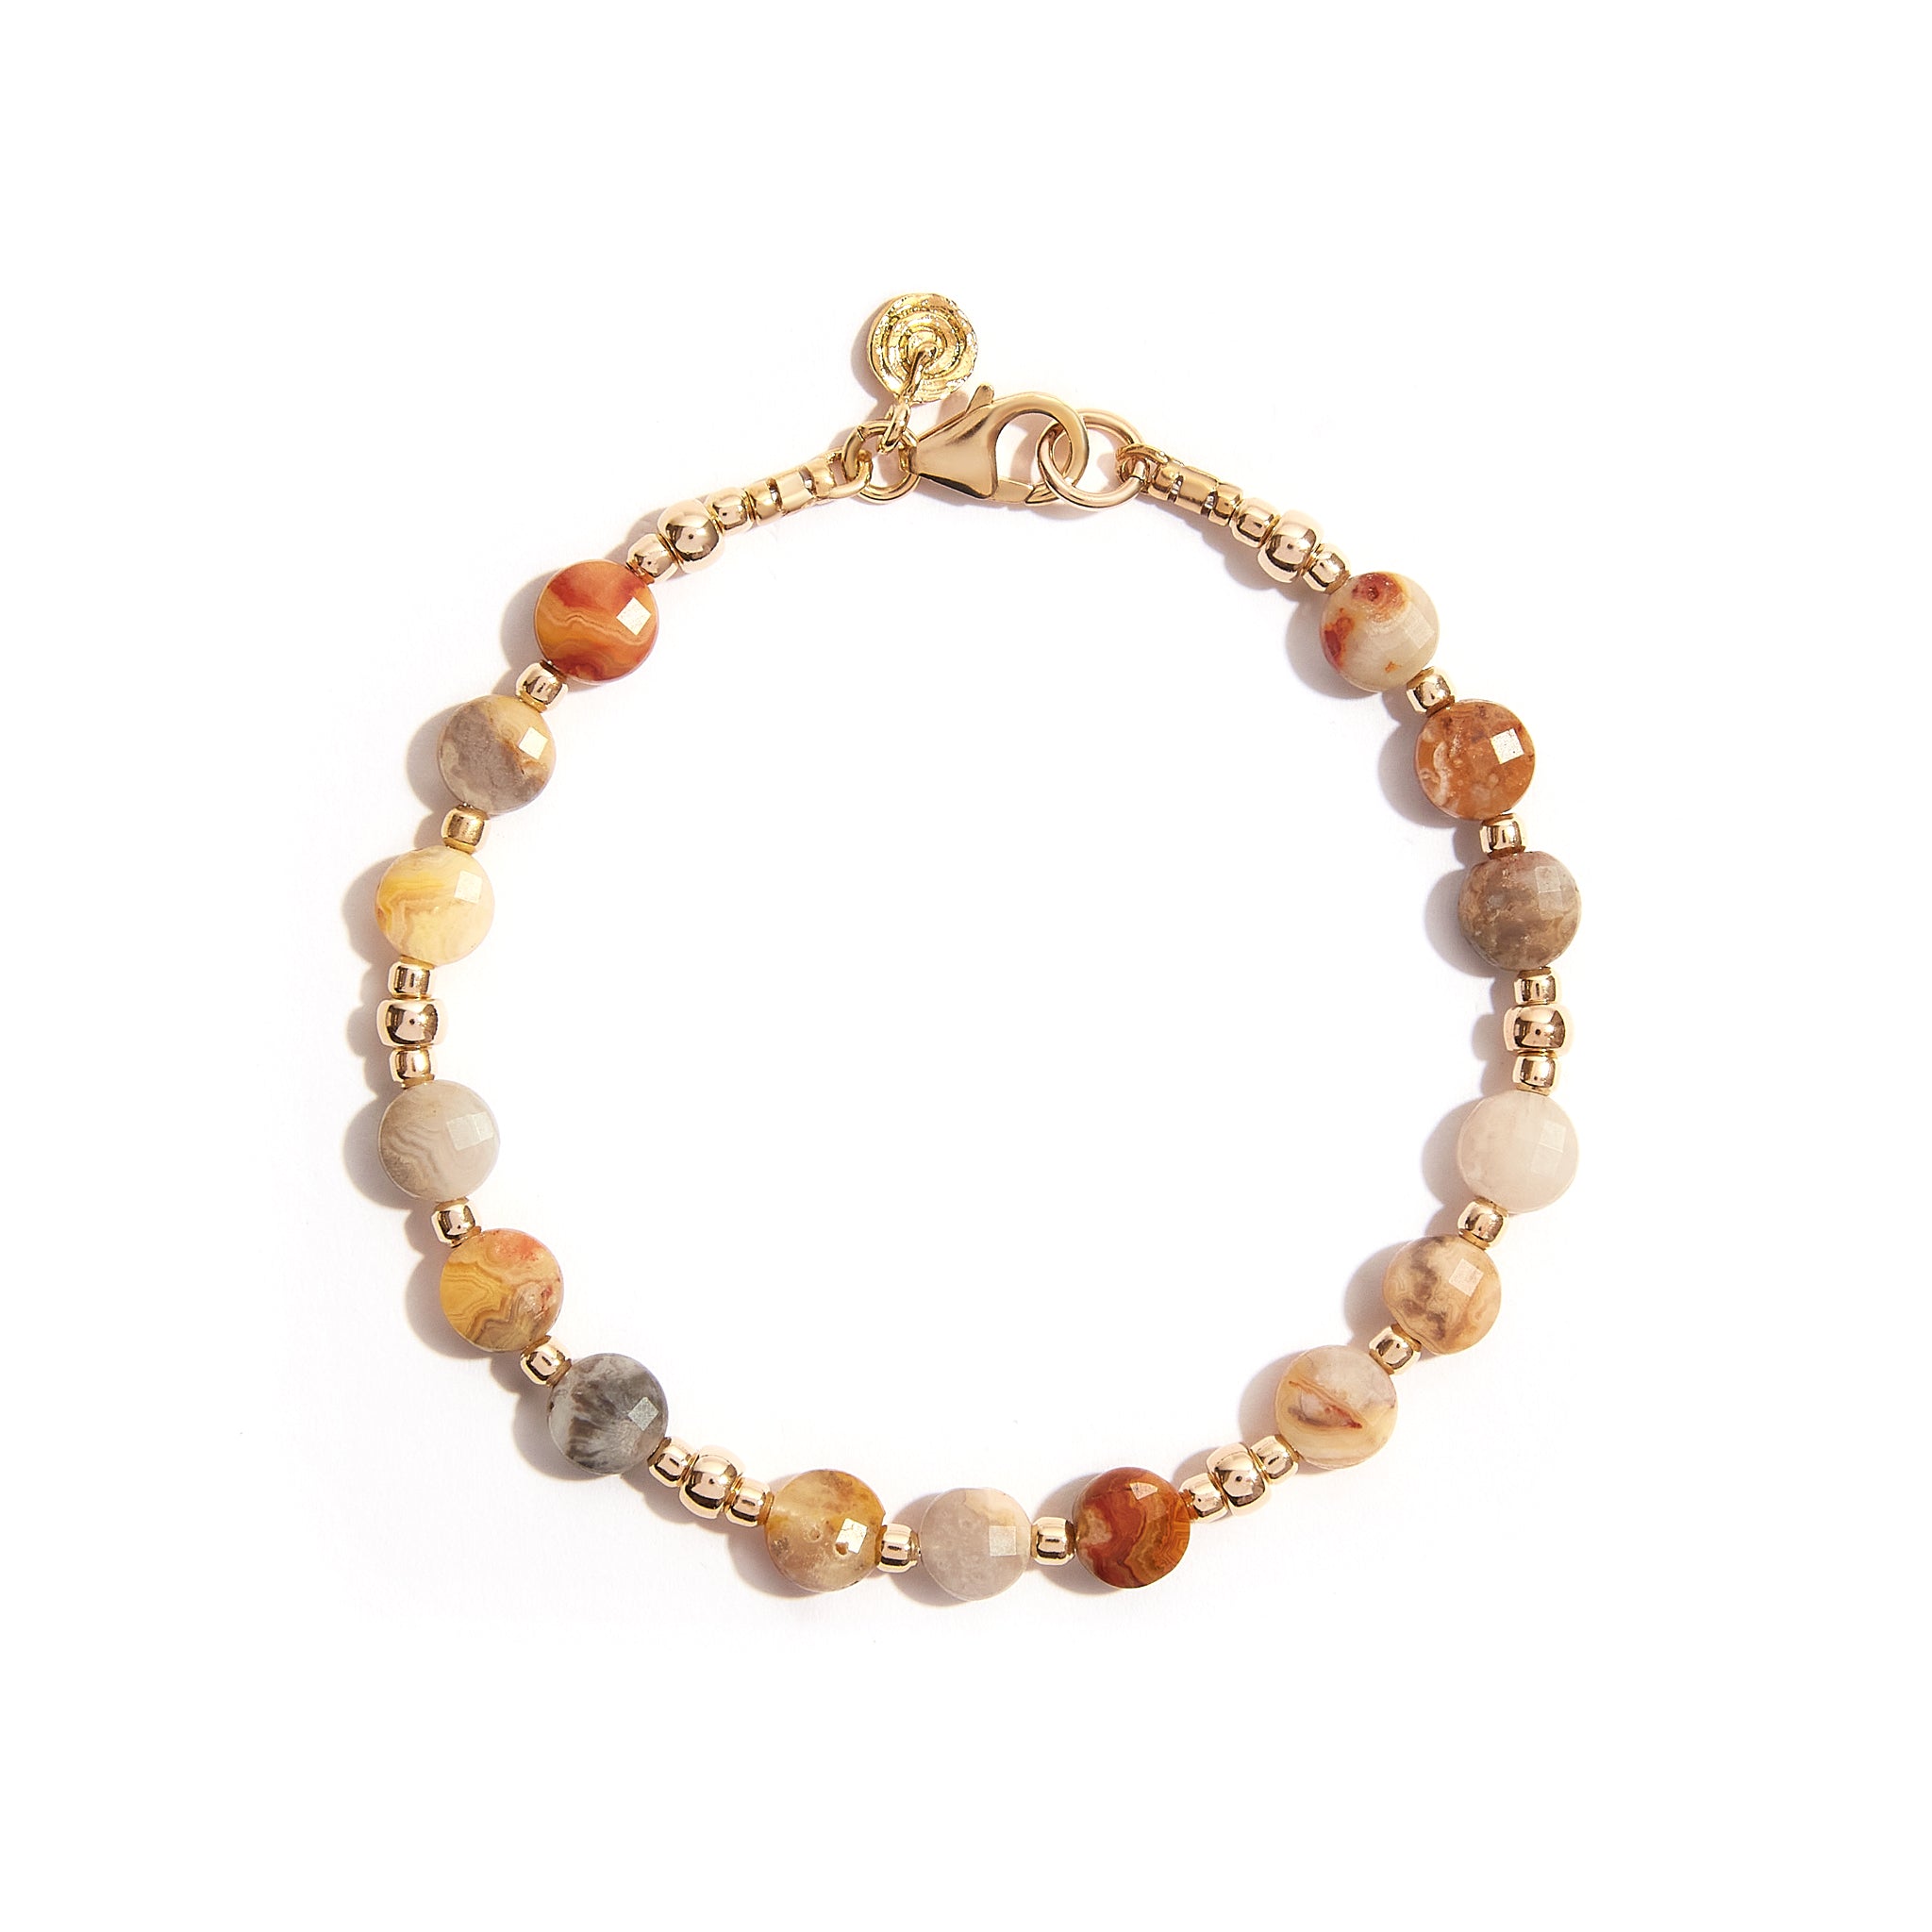 Introducing our Yellow Gold Sparkle Jasper Bracelet, a timeless embodiment of elegance and versatility. Crafted with meticulous care, this bracelet effortlessly captures attention with its understated charm. Material: 14ct Gold Filled. Length: 7 inches. Gemstone: Jasper. Cut: FacetCoin (6/4). Style: Elegant and versatile.